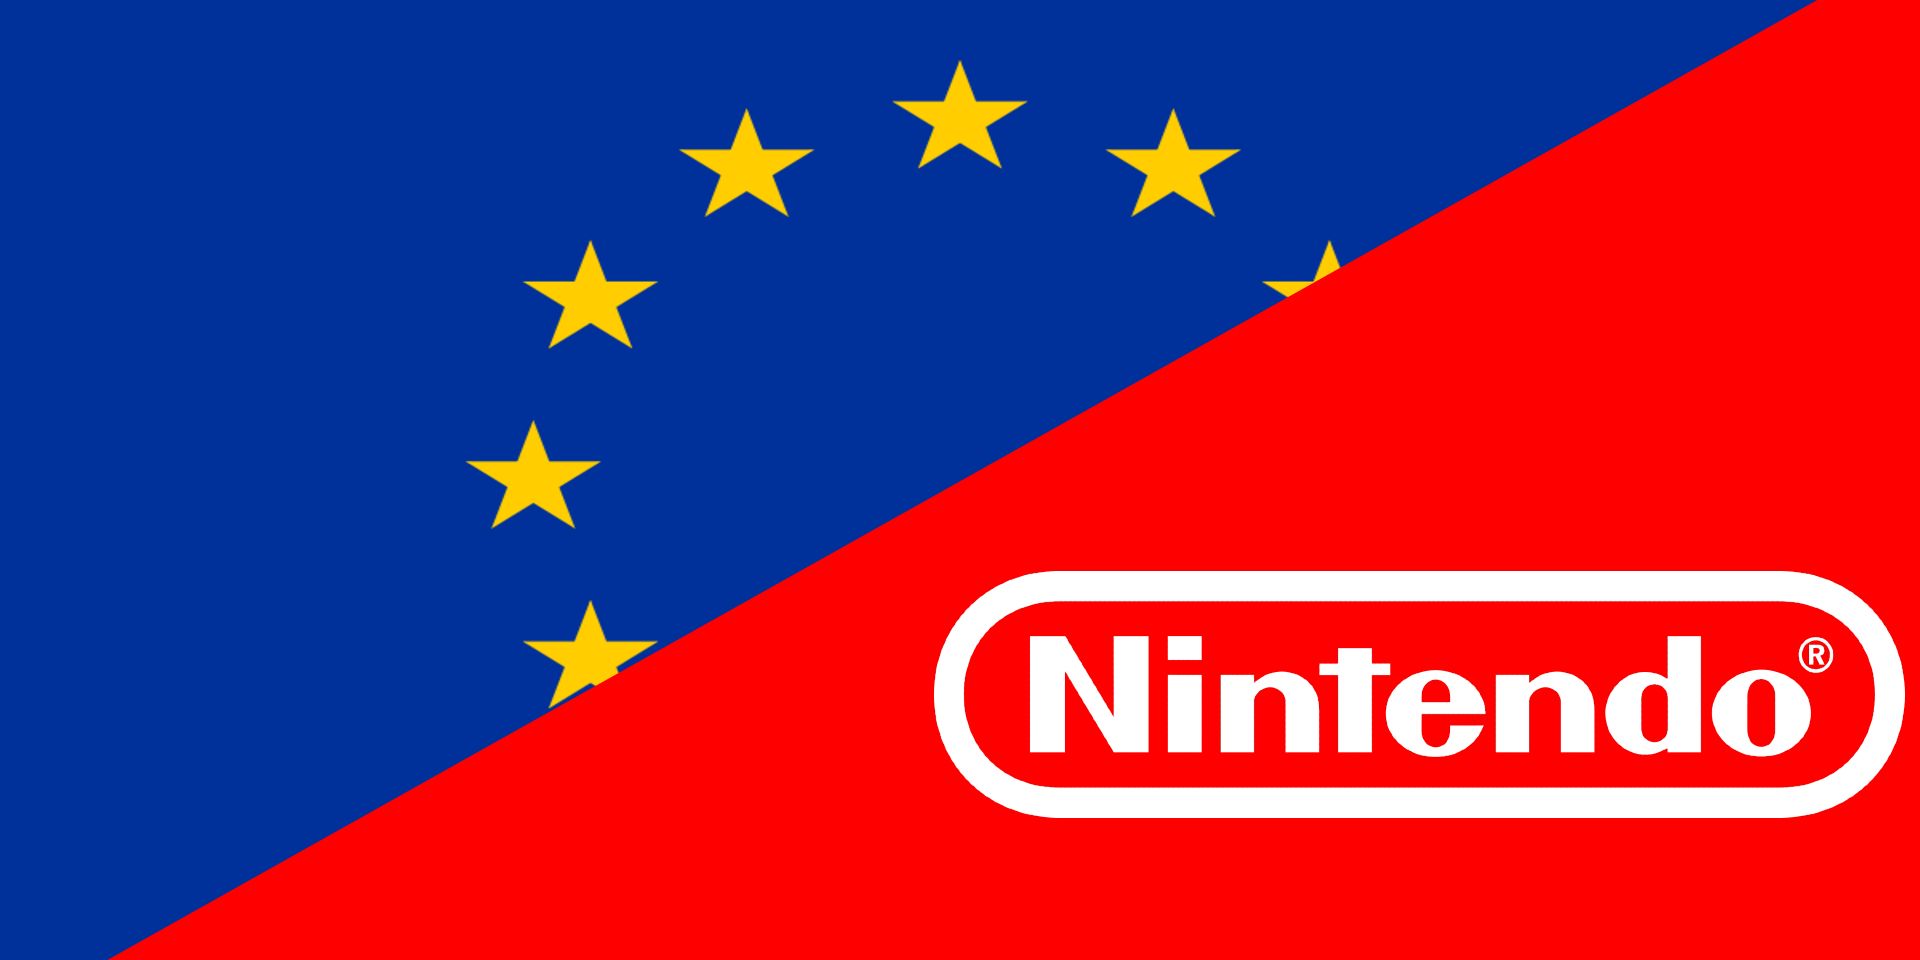 Nintendo Switch JoyCon Drift Investigation Called For By EU